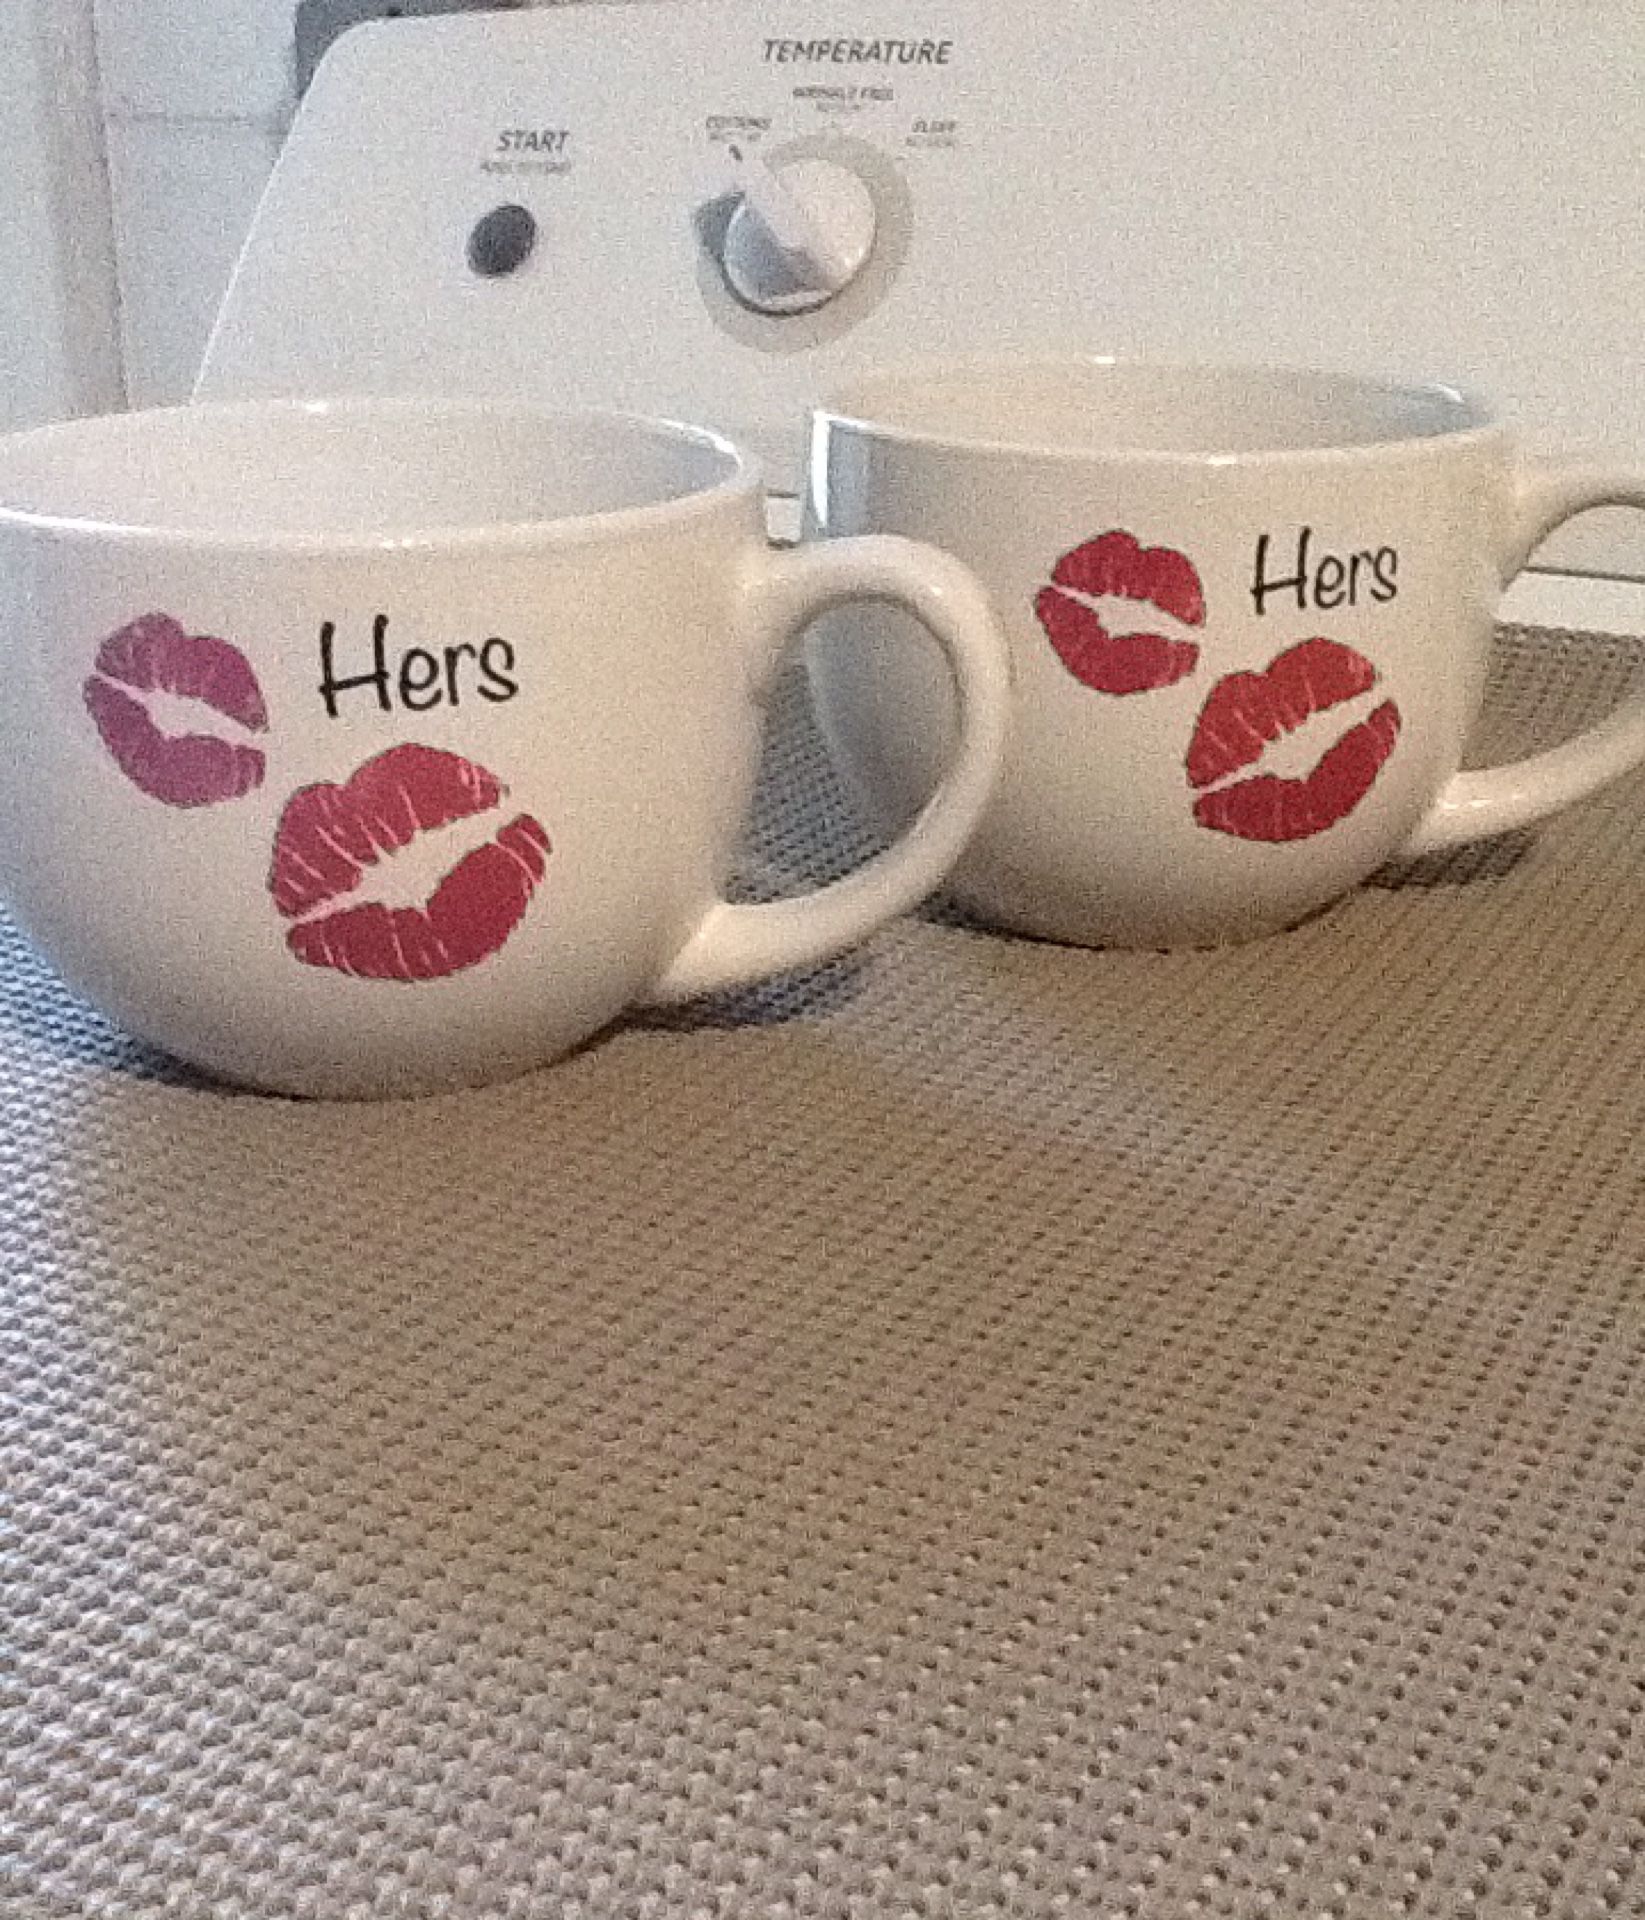 Coffee mugs/ tea cups/ fun gift giving/ office mug/ kitchen decoration/ family cup/ red lips with Hers message